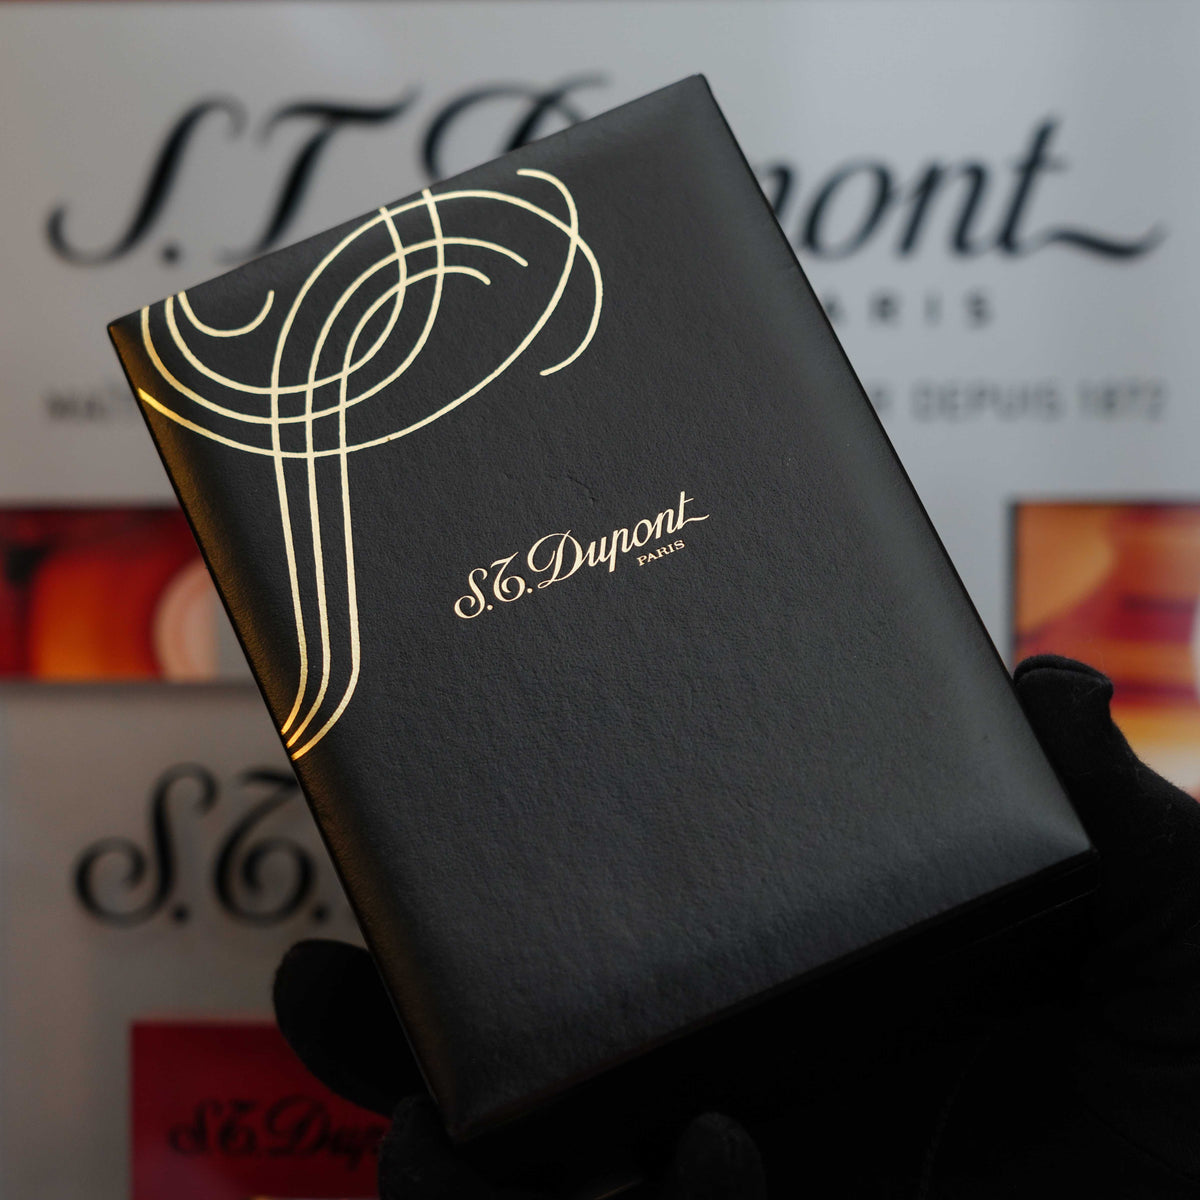 A person wearing black gloves holds an S.T. Dupont Paris box with gold lettering and design, showcasing a Vintage 1993 rare Art Nouveau early Limited Editions 24k Gold finish natural Green lacquer ligne 2 lighter, in front of a blurred background featuring S.T. Dupont branding.